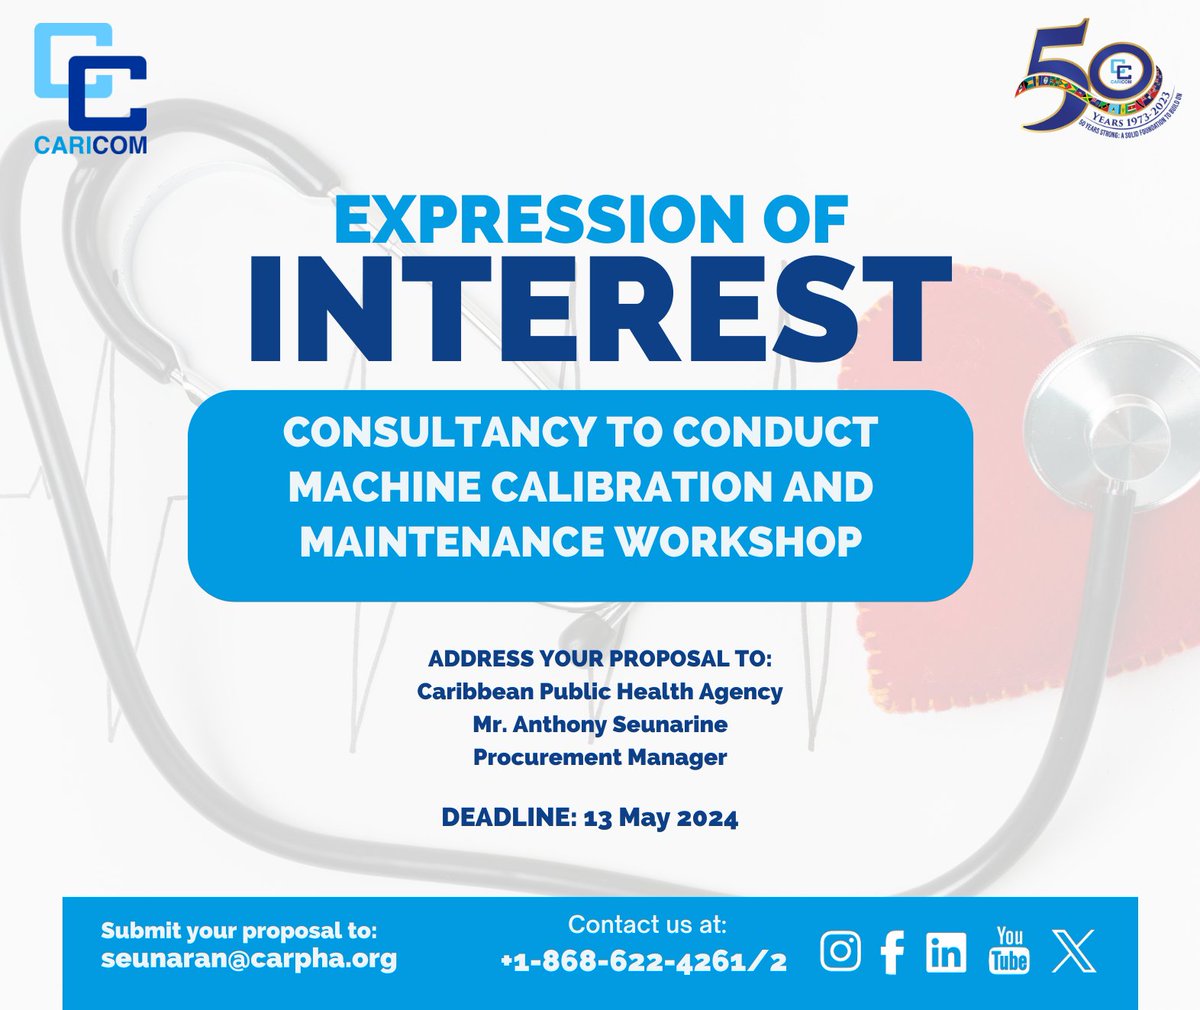 #OPPORTUNITY 💼#CARICOM nationals are invited to submit expressions of interest 🔍Consultancy to Conduct Machine Calibration and Maintenance Workshop 🏢CARPHA 🇹🇹 ✉️ Send EOIs to seunaran@carpha.org 📅 Deadline: 13 May 2024